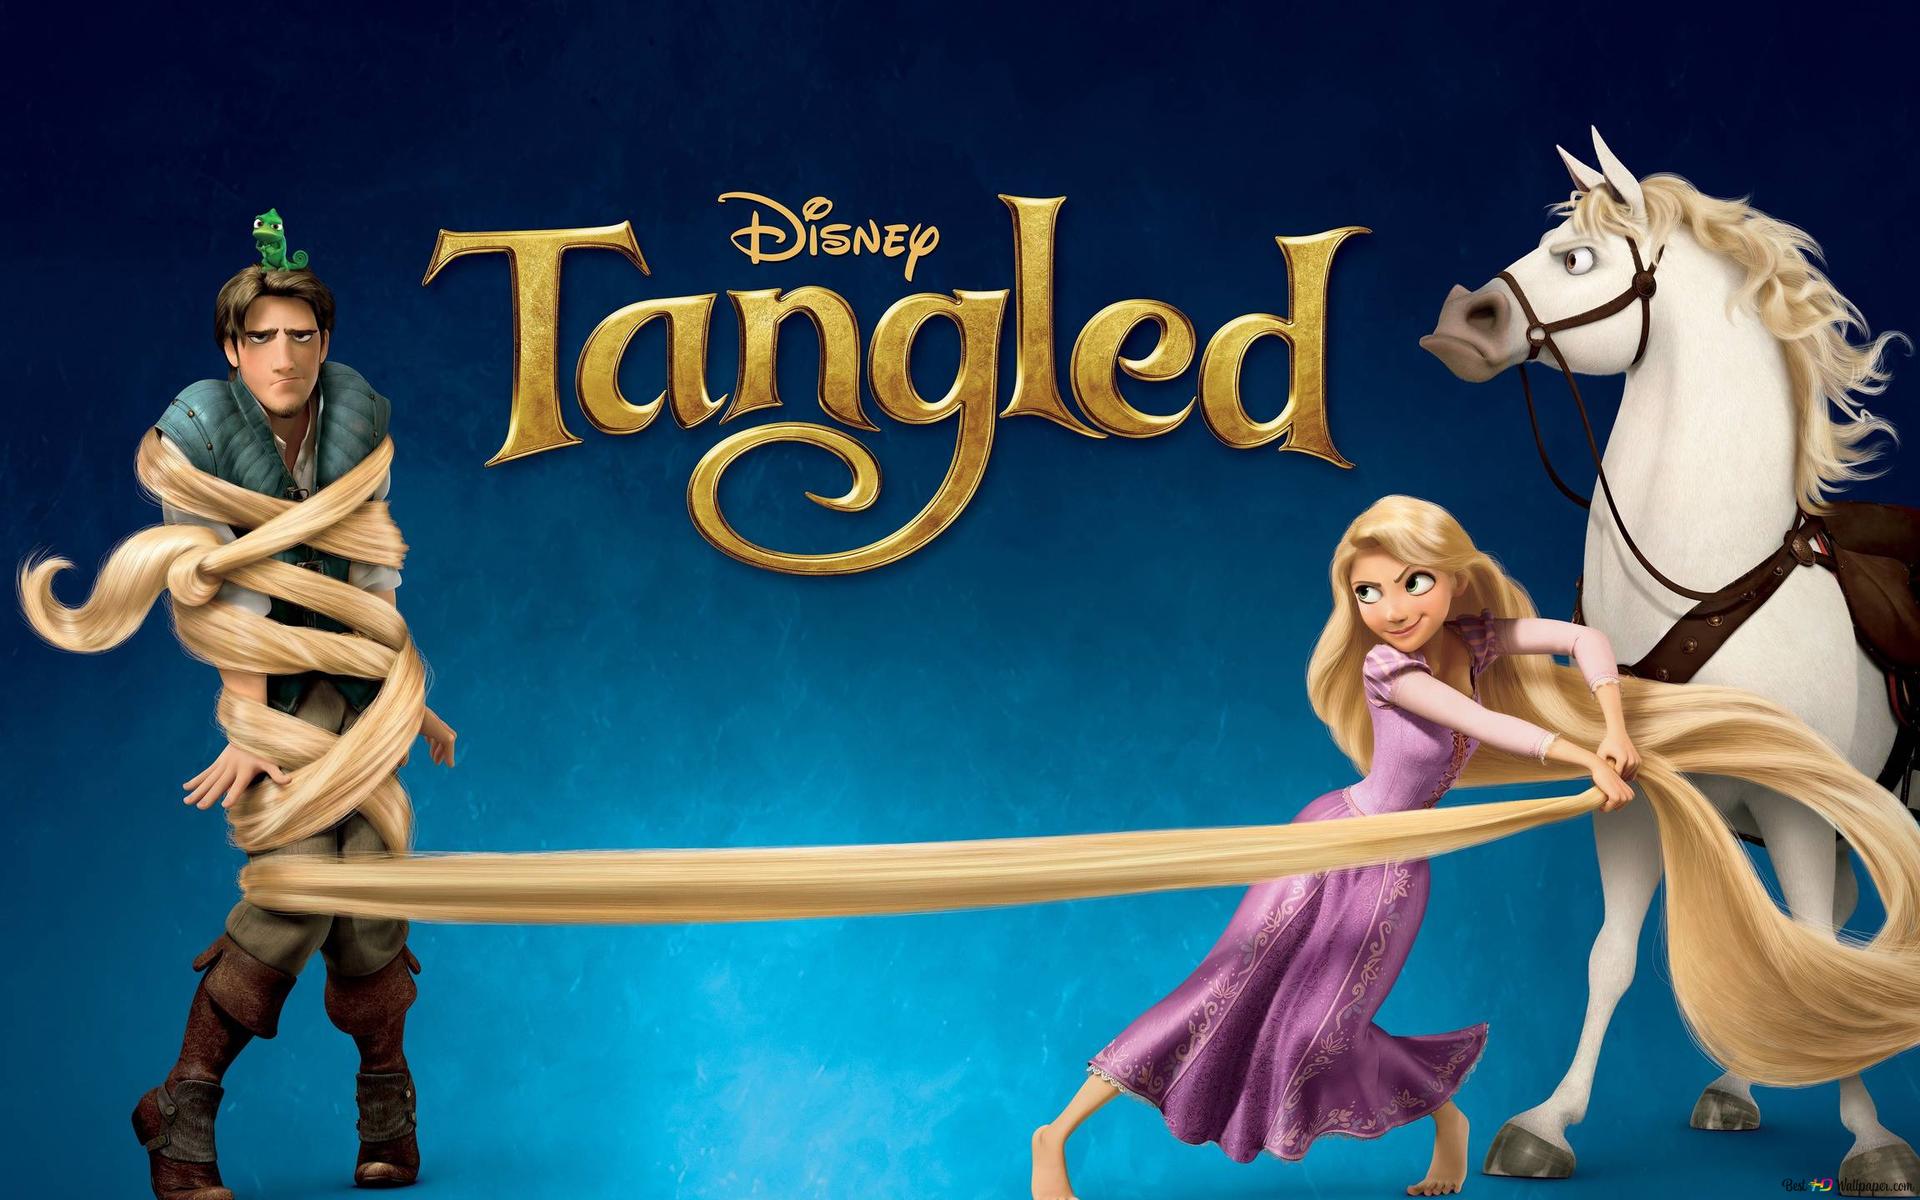 Tangled is a 2010 American 3D computer-animated fantasy film produced by Walt Disney Animation Studios. - Rapunzel